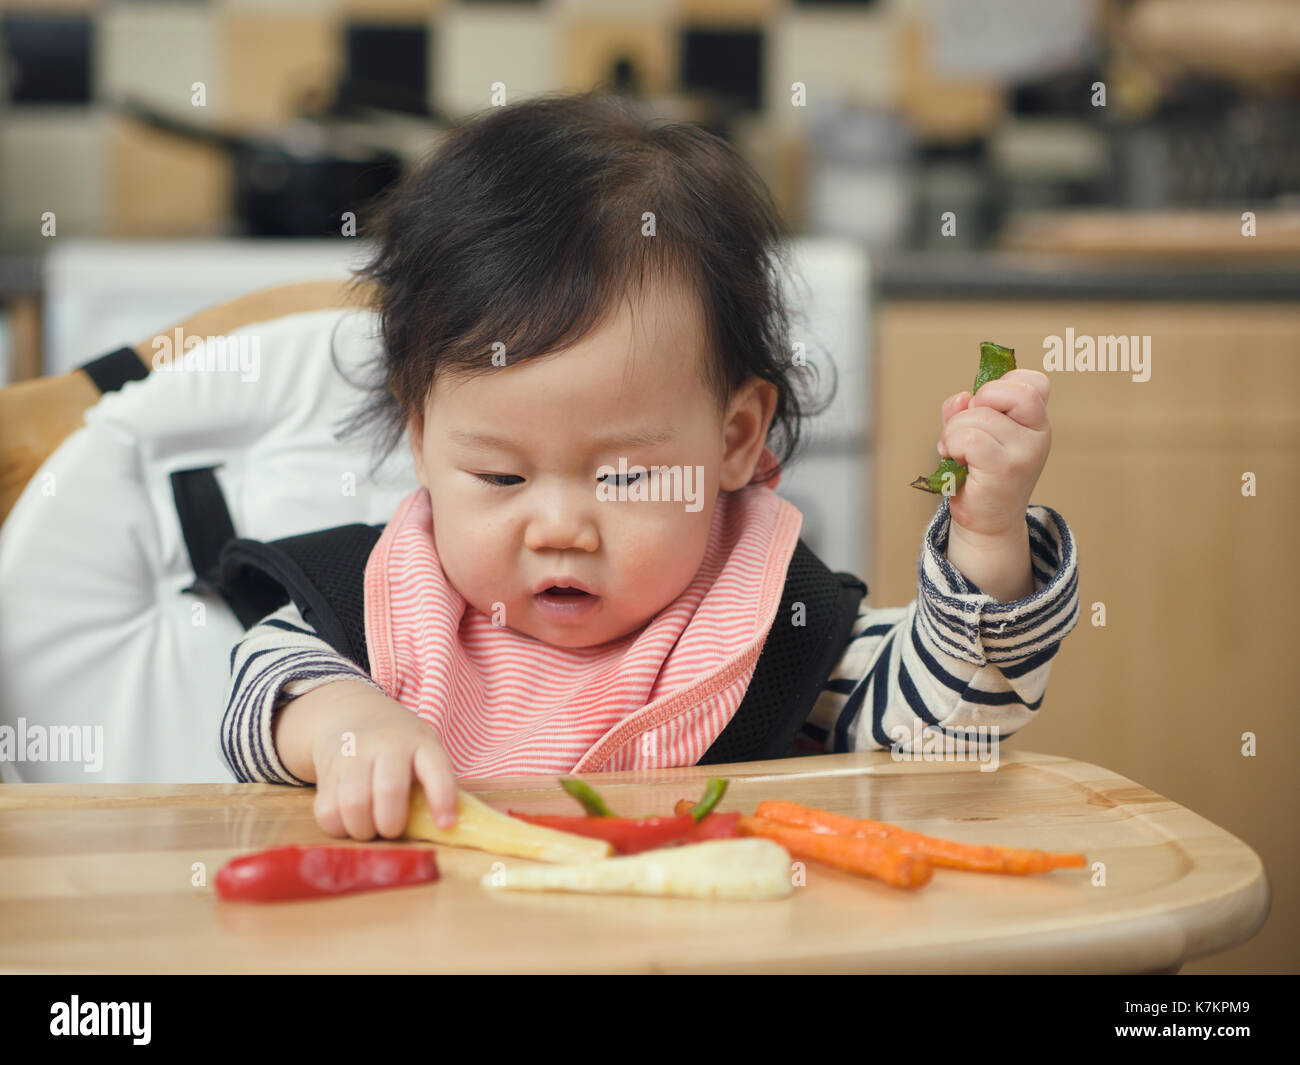 Baby Food Pureed Parsnip On A Spoon Stock Photo - Download Image